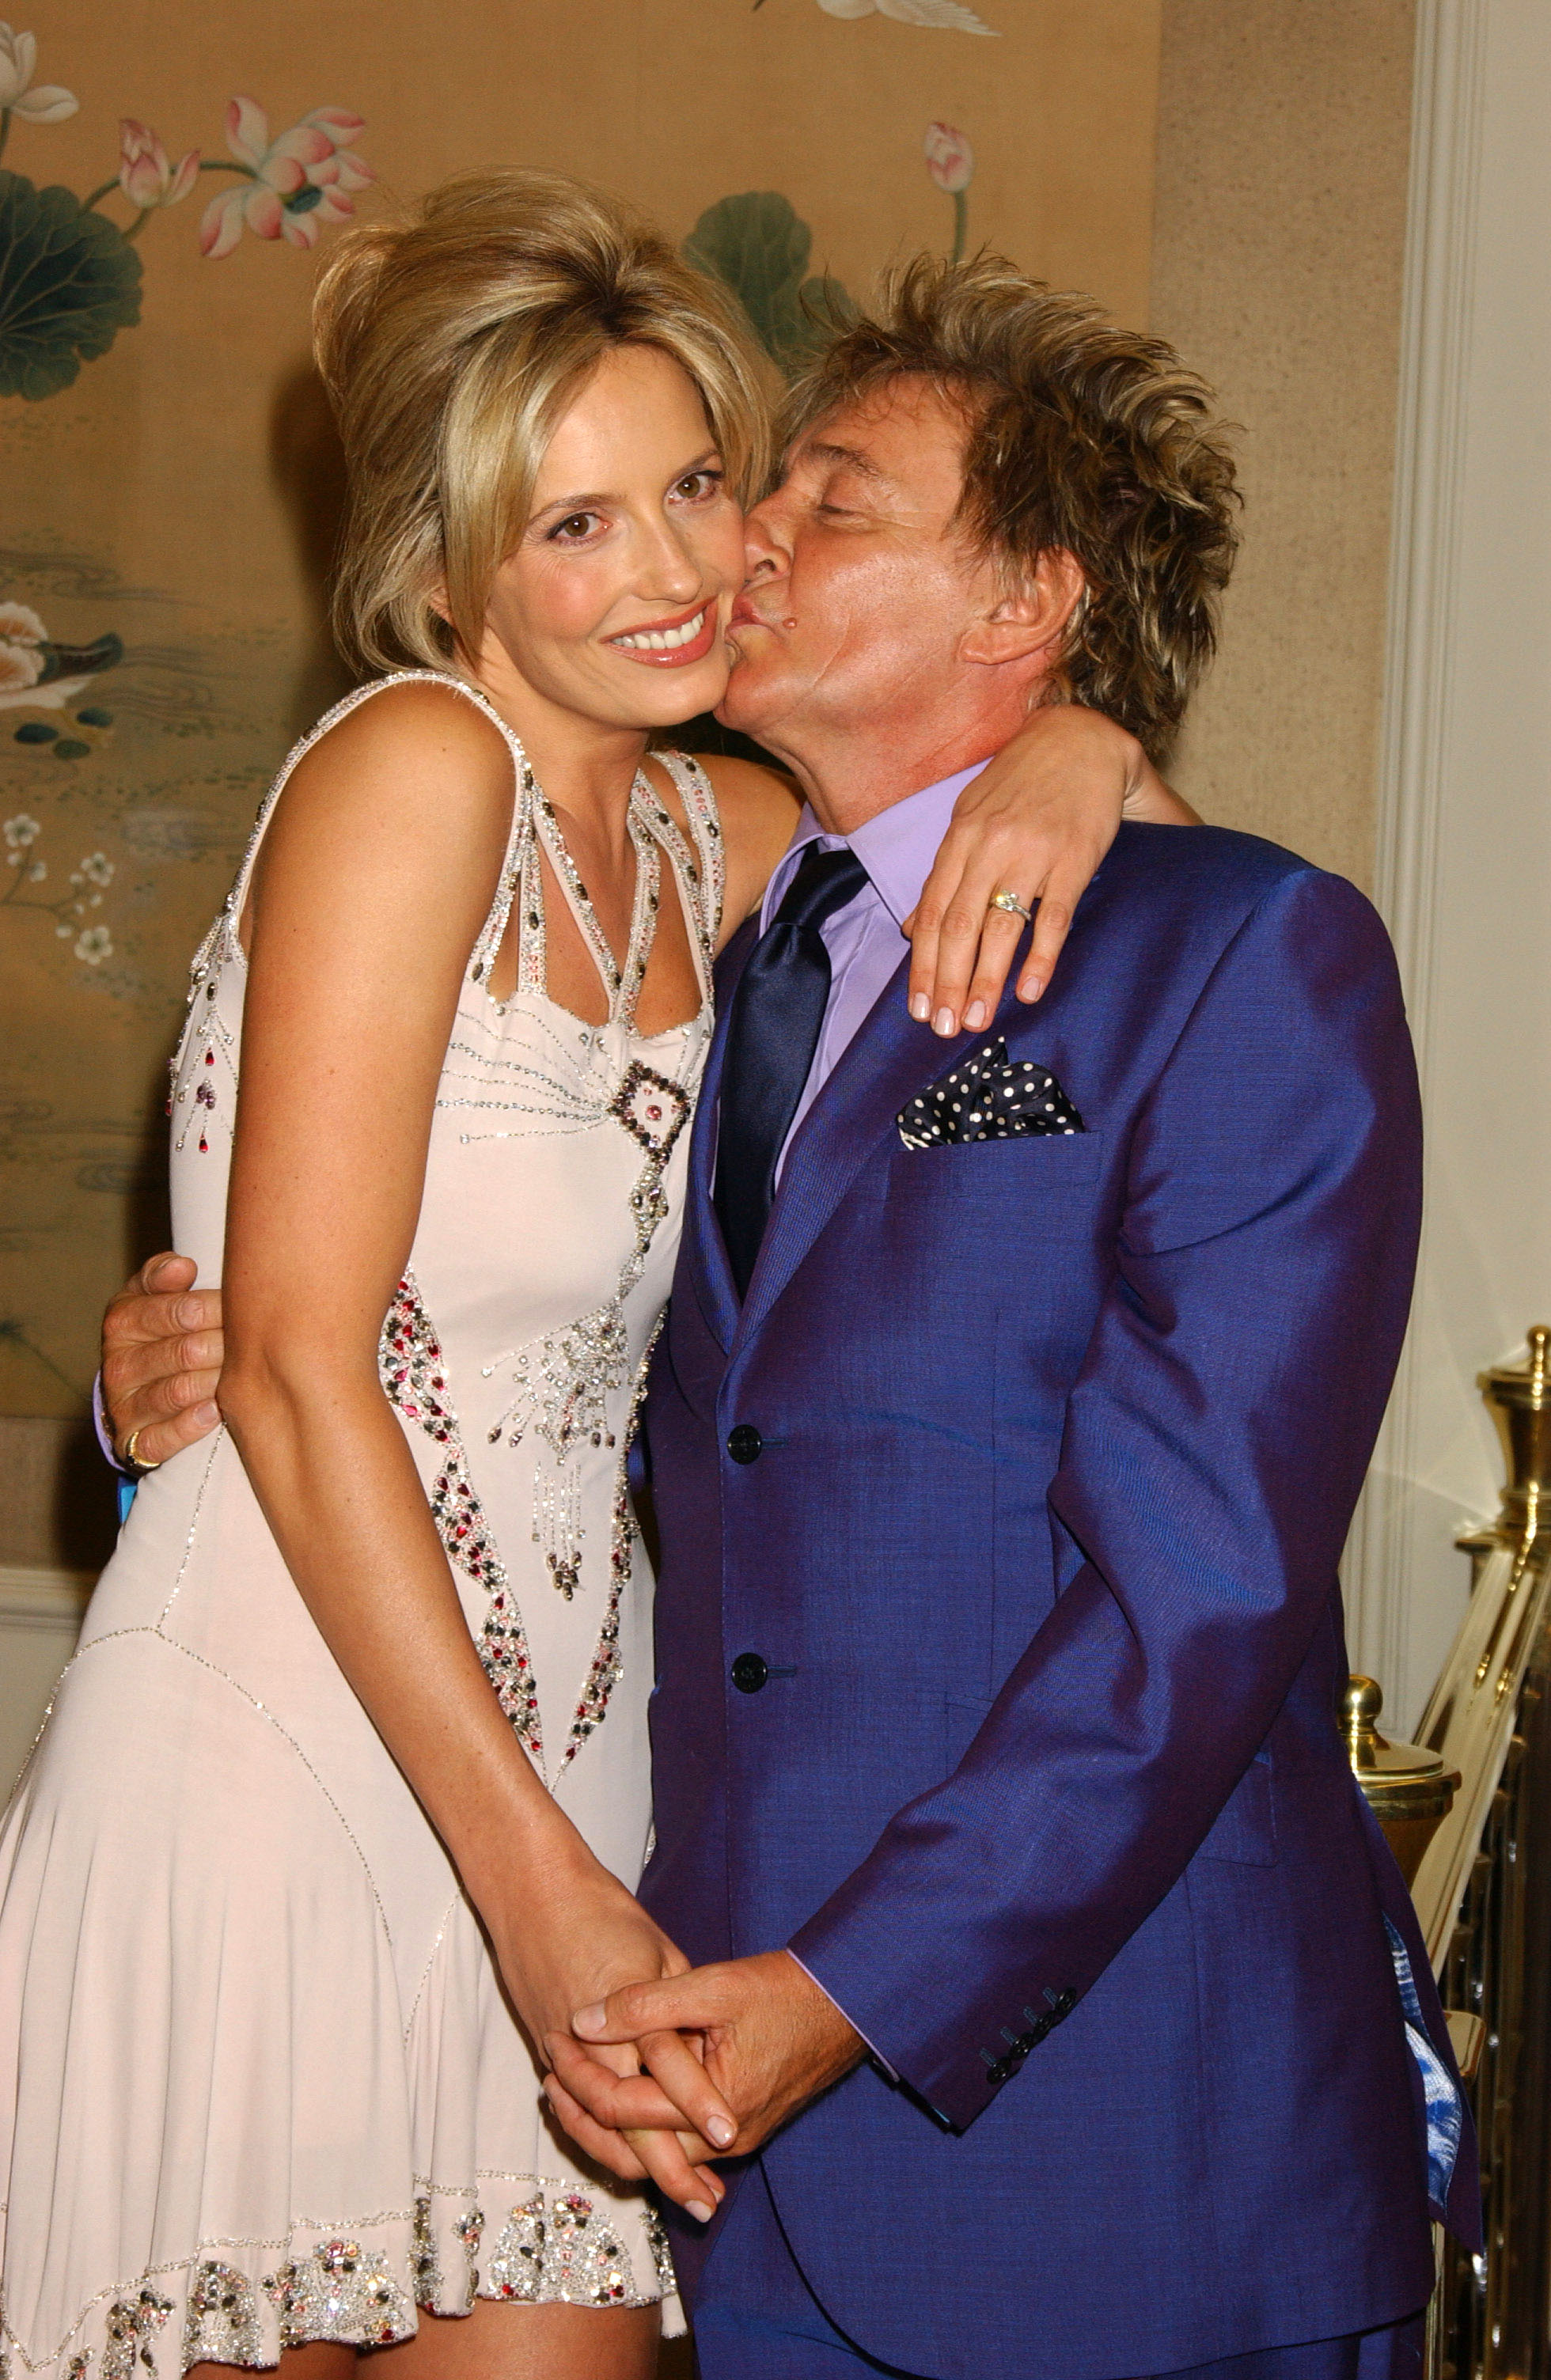 Penny Lancaster and Rod Stewart in London in 2005 | Source: Getty Images